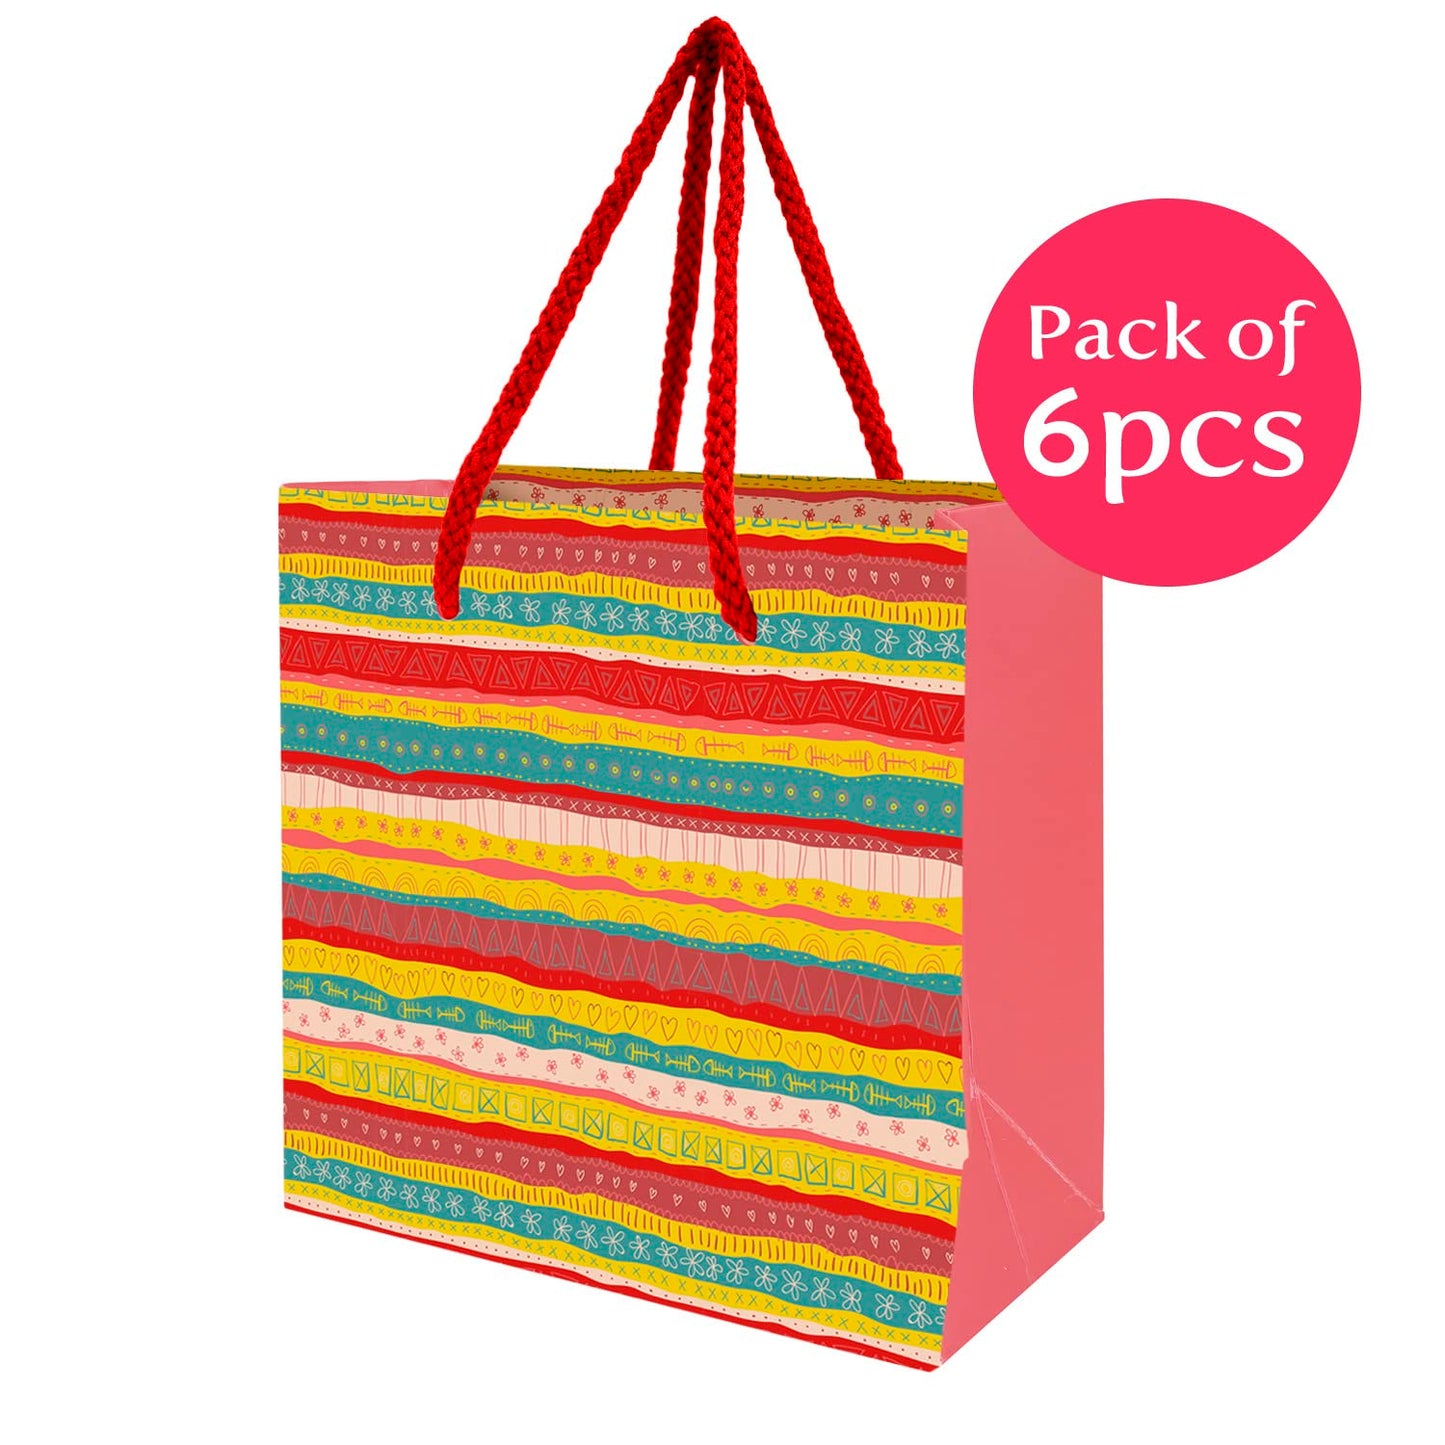 PaperPep Multicolor Festive Print 6"X6"X3" Gift Paper Bag Pack of 6 | Gift Bags for Return Gifts, Presents, Weddings, Birthday, Holiday Presents, Celebrations